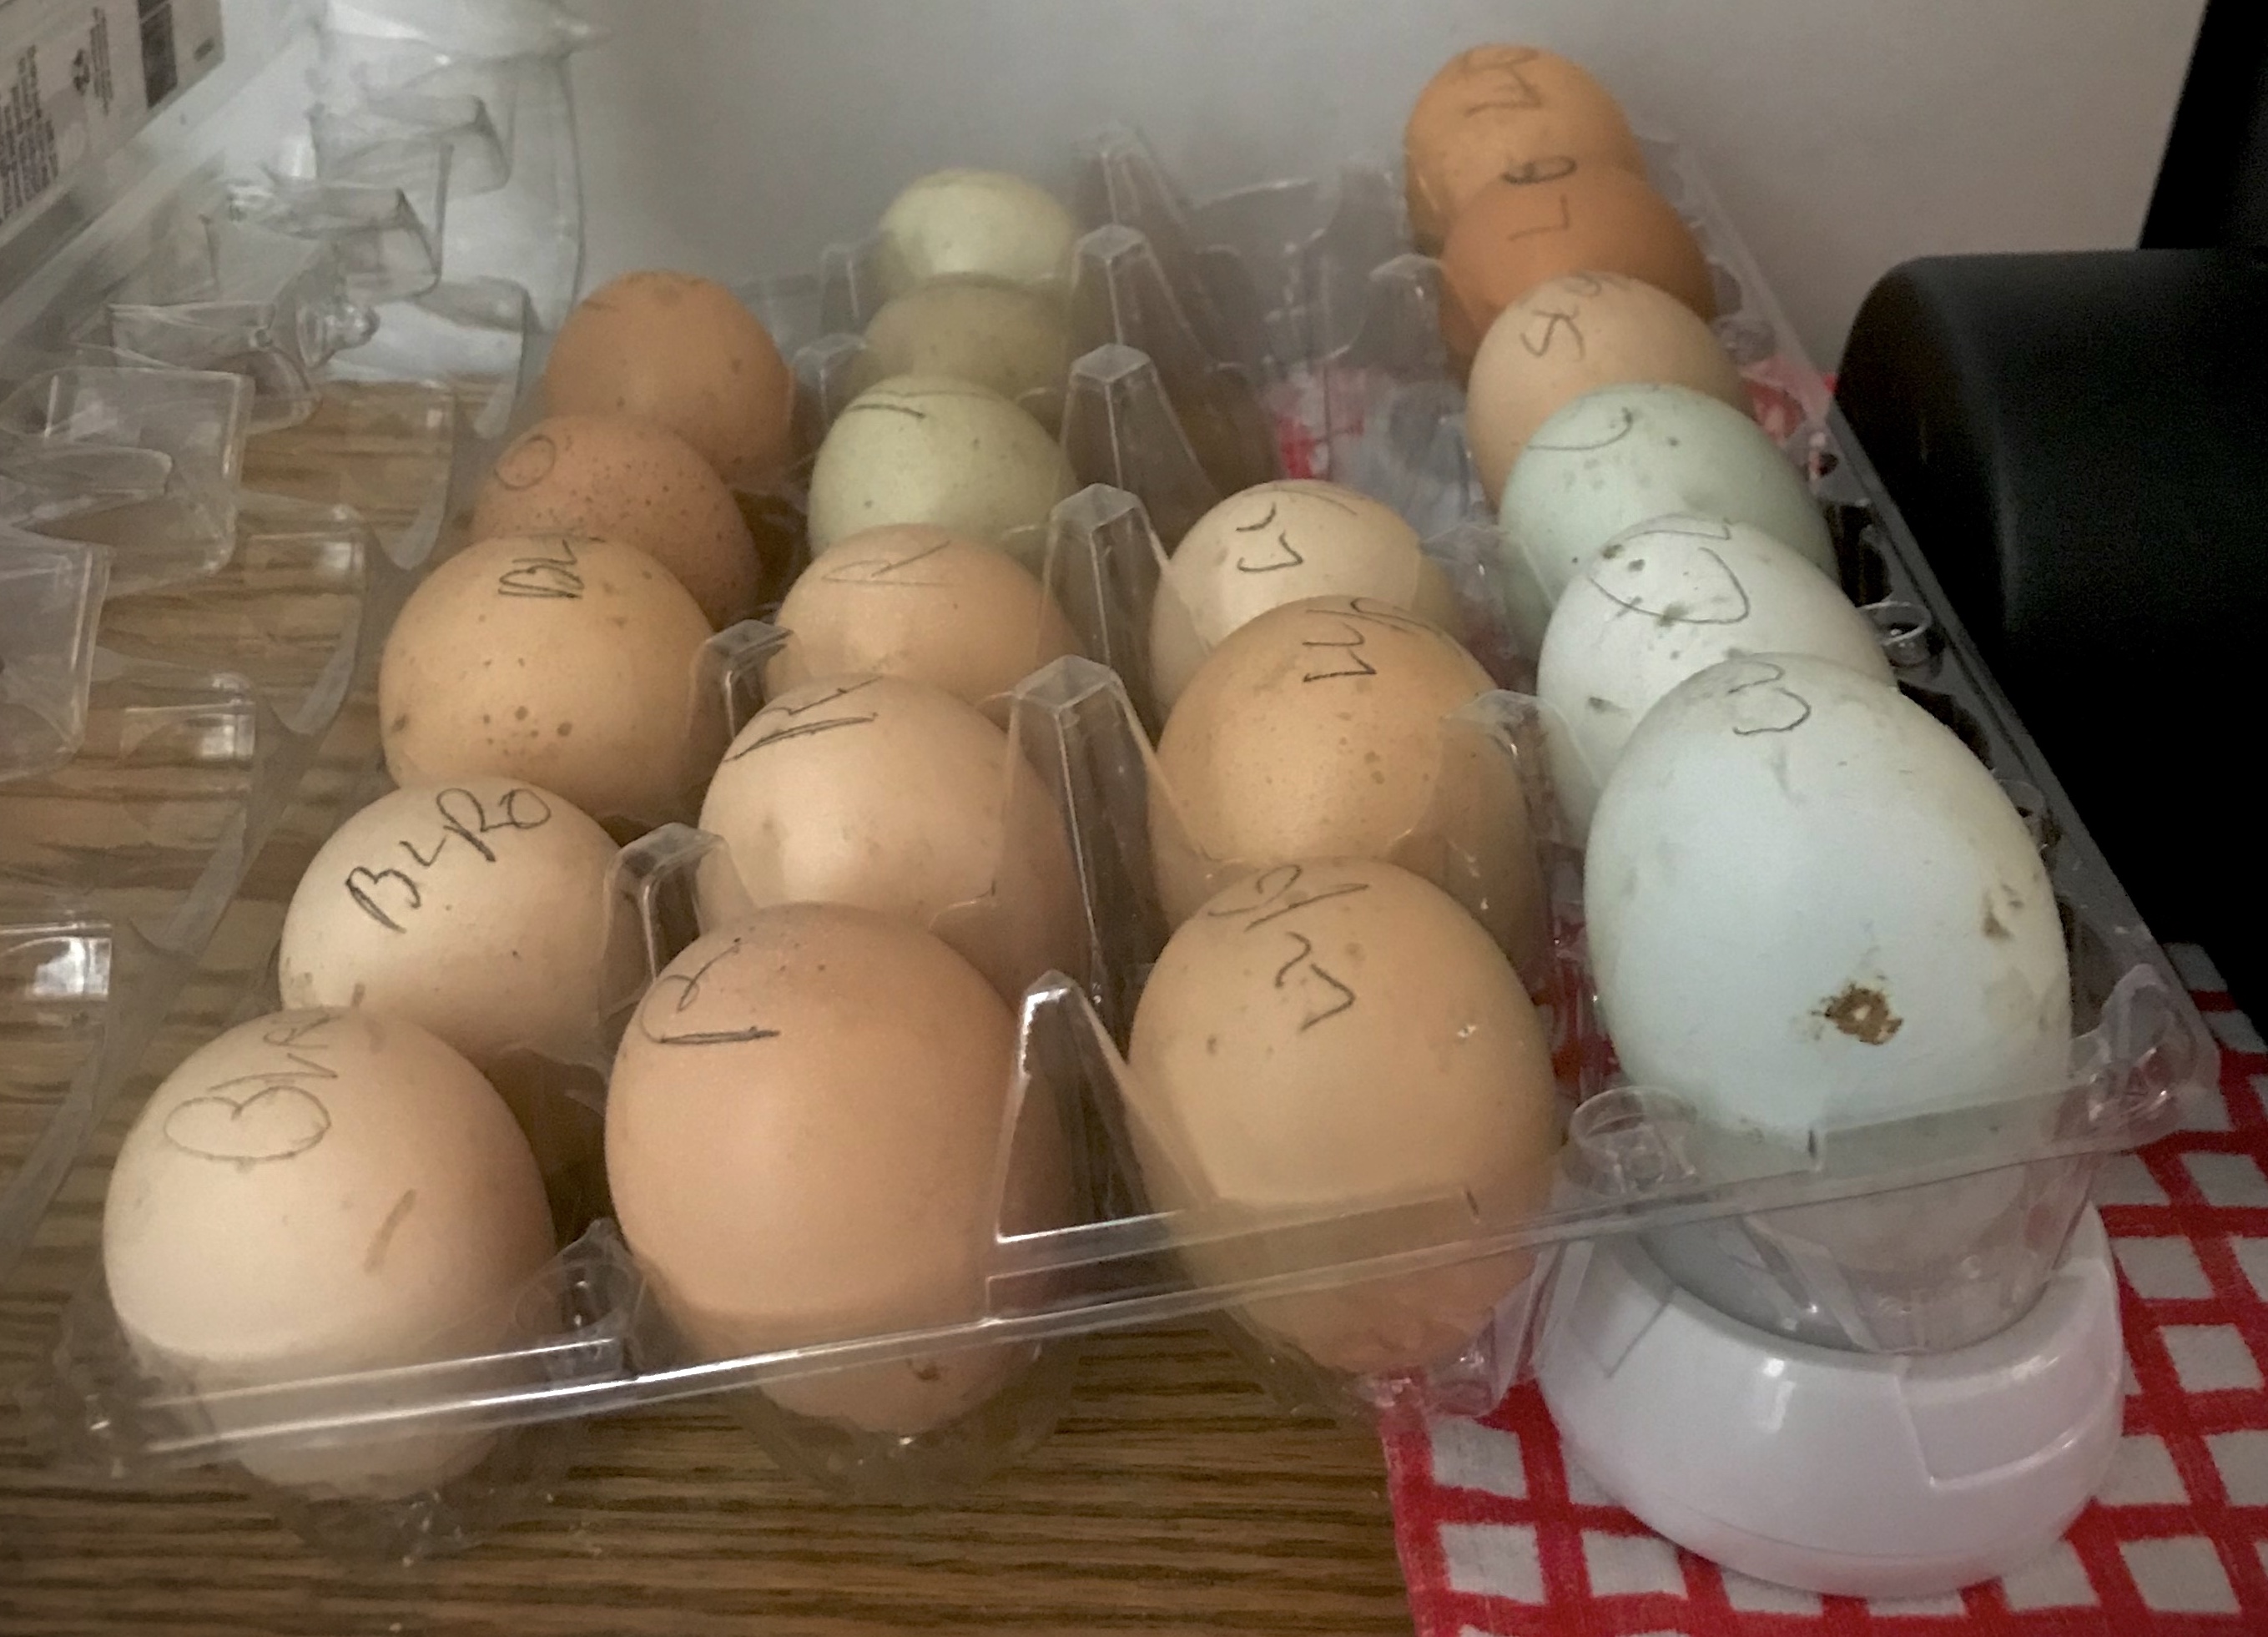 shipped eggs tilted for 24 hours prior to incubation